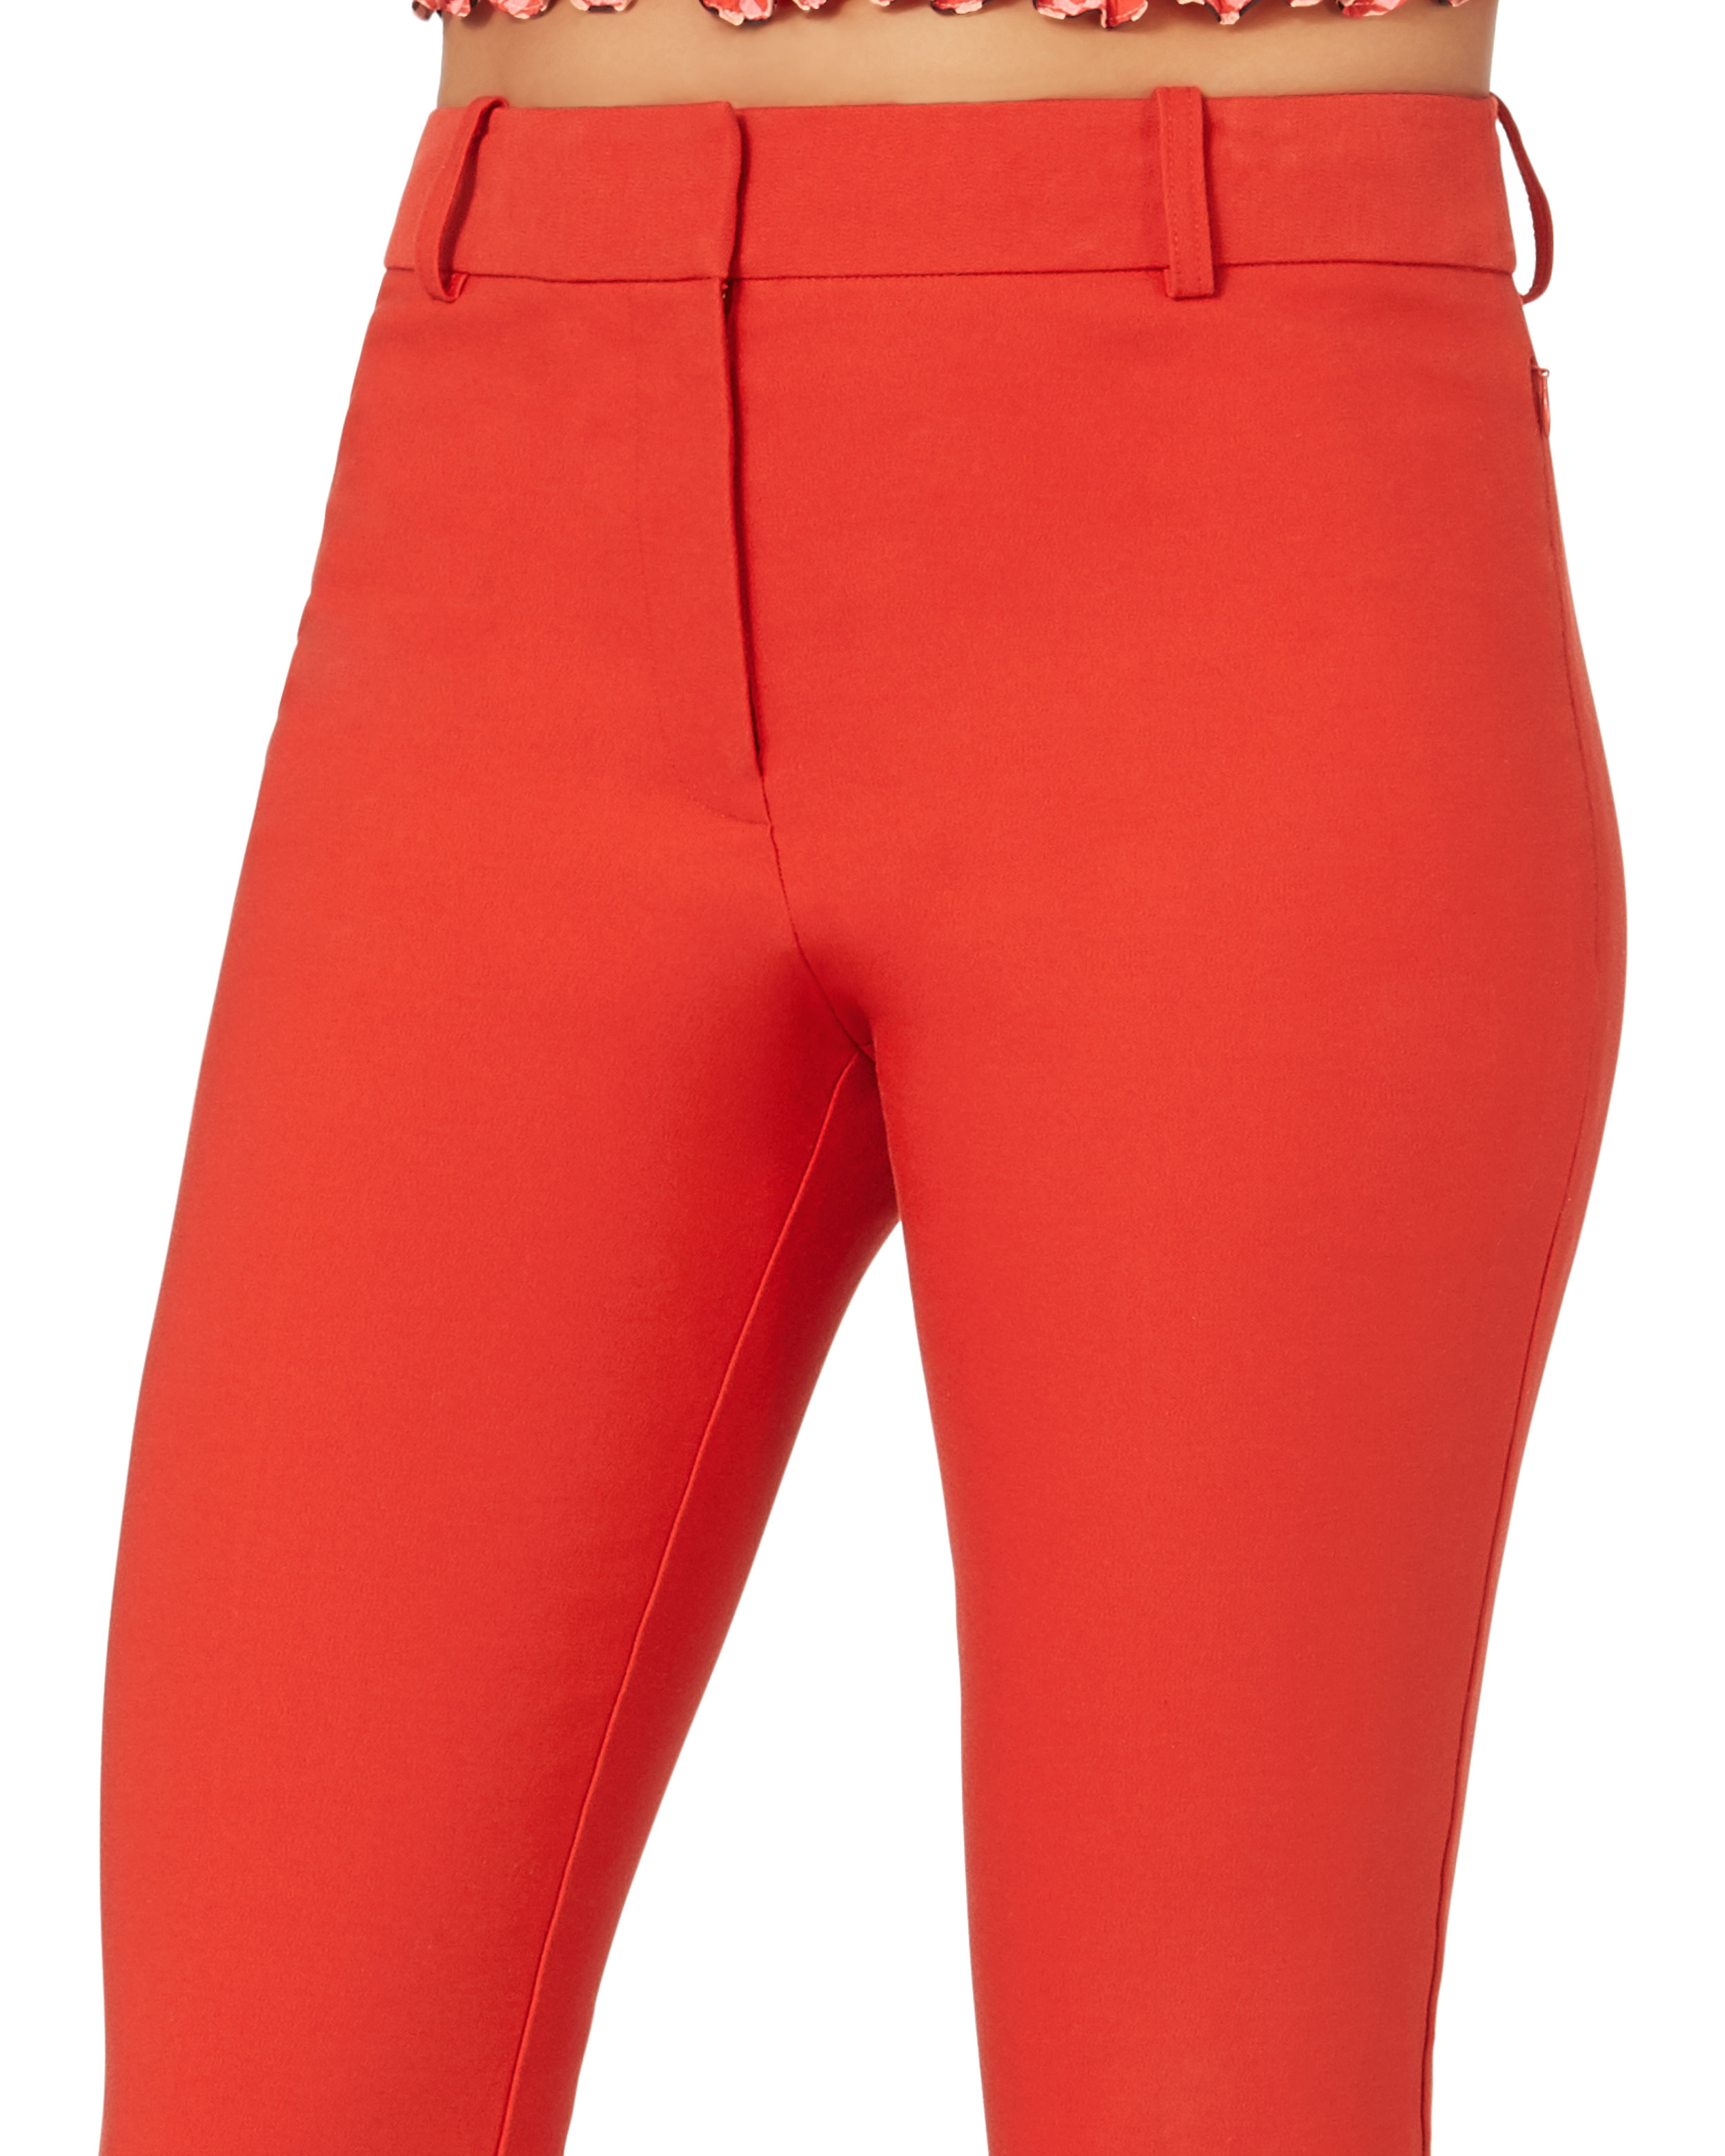 Red Crop Flare Pants